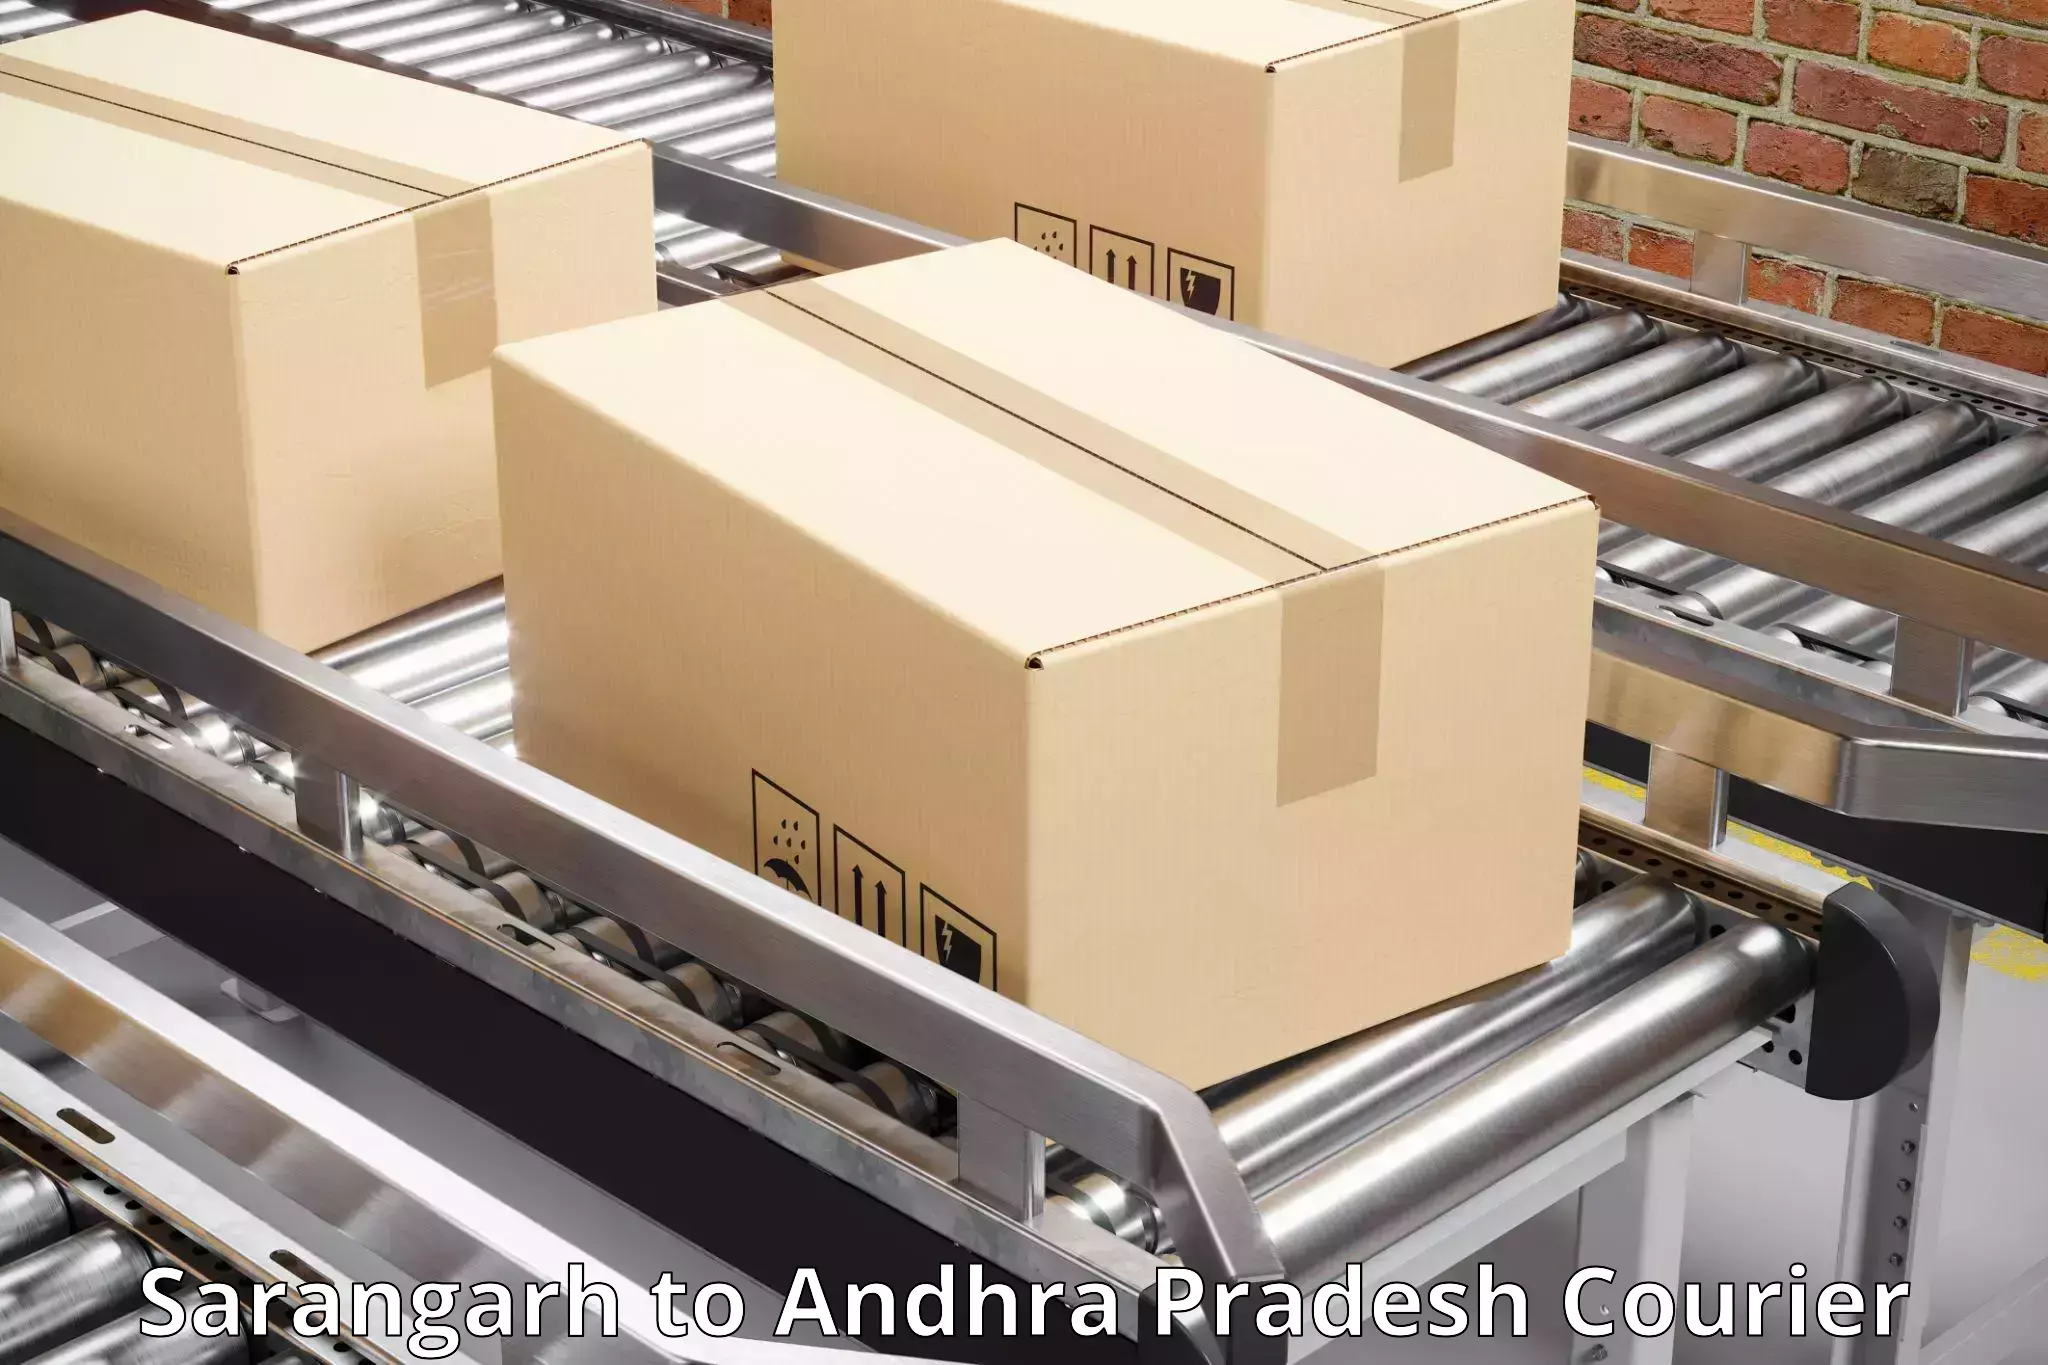 Same-day delivery solutions Sarangarh to Krishna AP